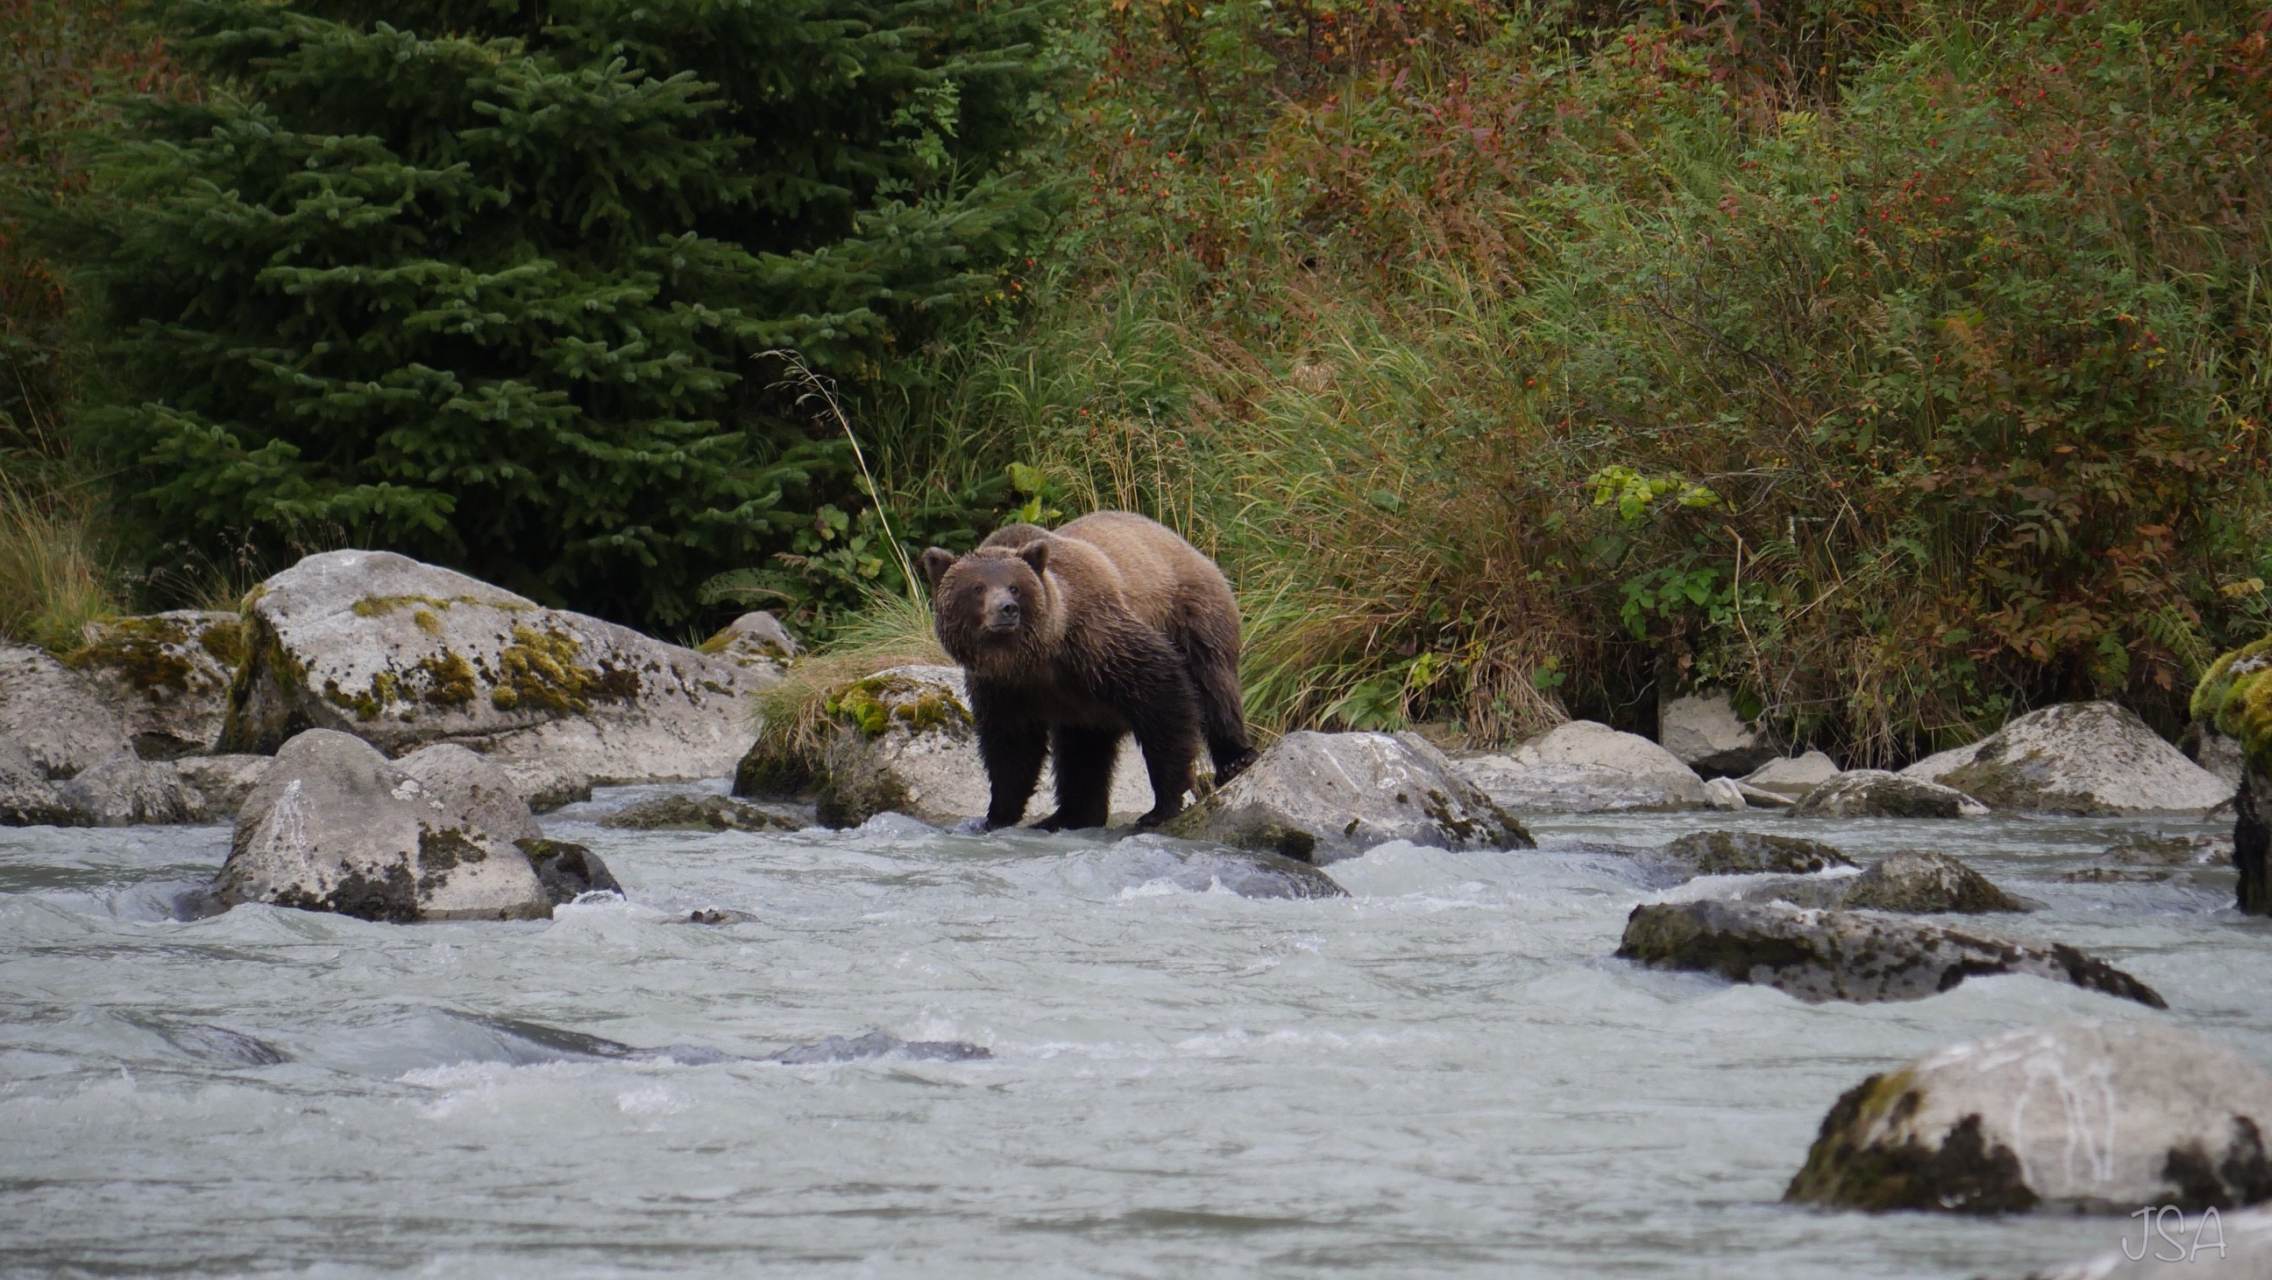 A grizzly bear standing in a river during daylight surrounded by rocks and with trees in the background